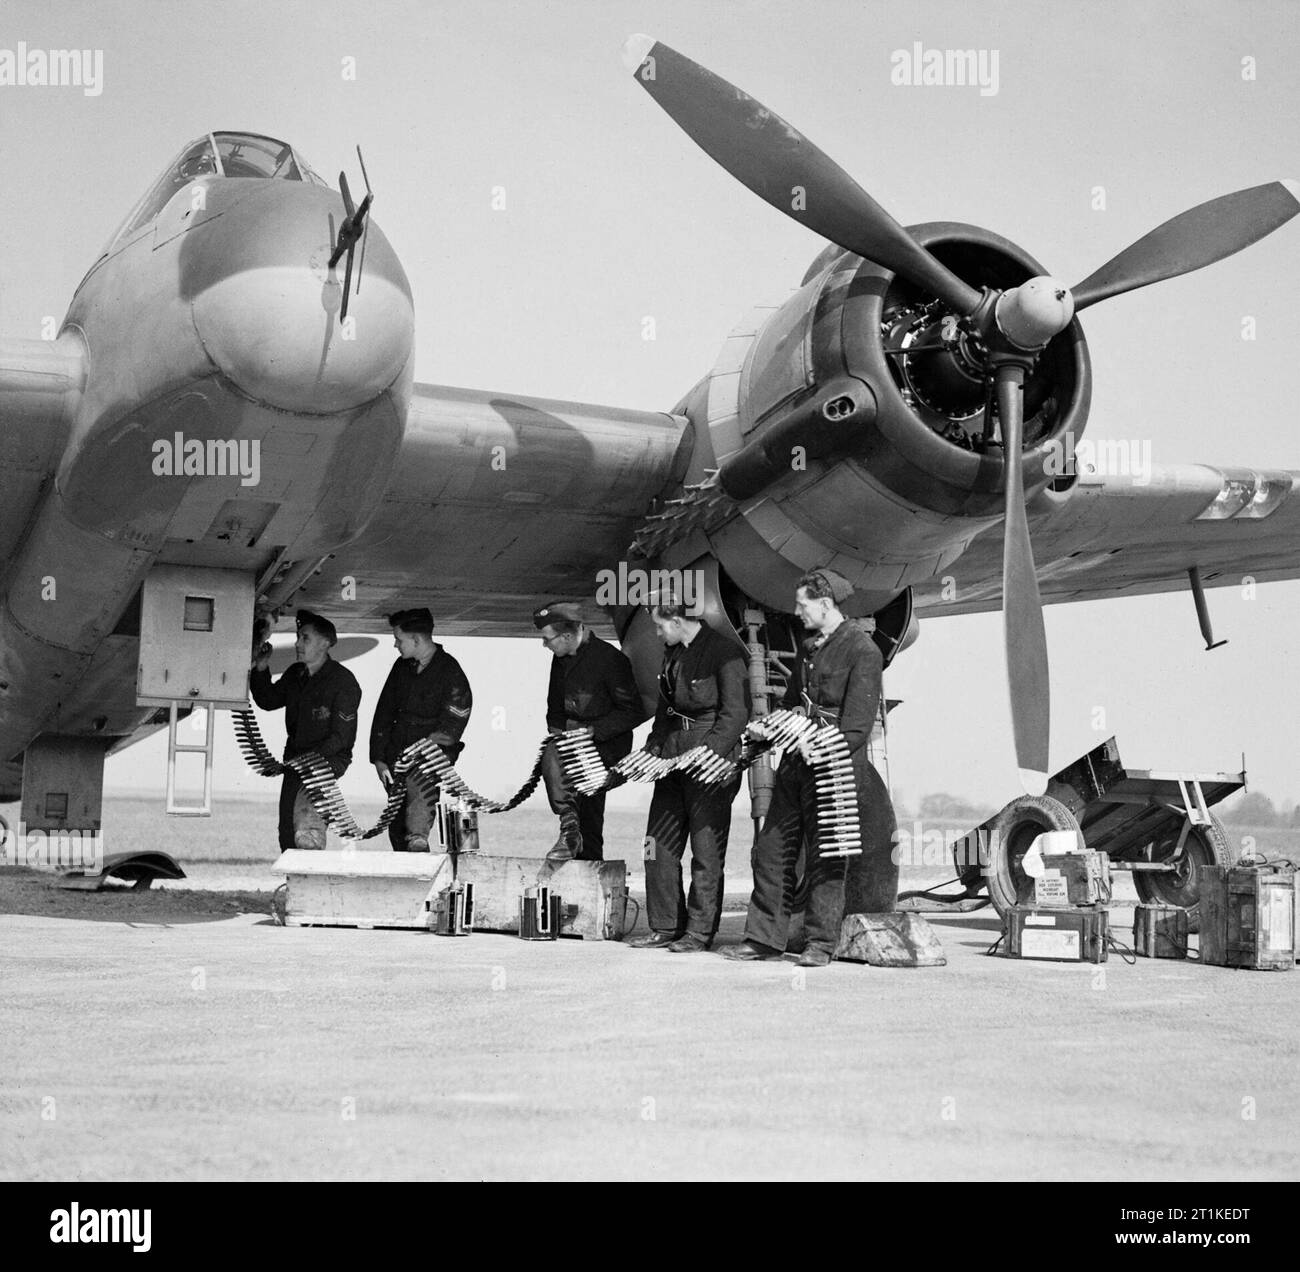 Bristol Beaufighter Mk VIF of No. 96 Squadron RAF being re-armed at Honiley, Warwickshire, 23 March 1943. Beaufighter VIF V8748/ZJ-R of No. 96 Squadron being re-armed at Honiley, 23 March 1943. The armourers are feeding belts of ball and high-explosive incendiary ammunition into the magazines of the aircraft's four 20mm Hispano cannon. Stock Photo